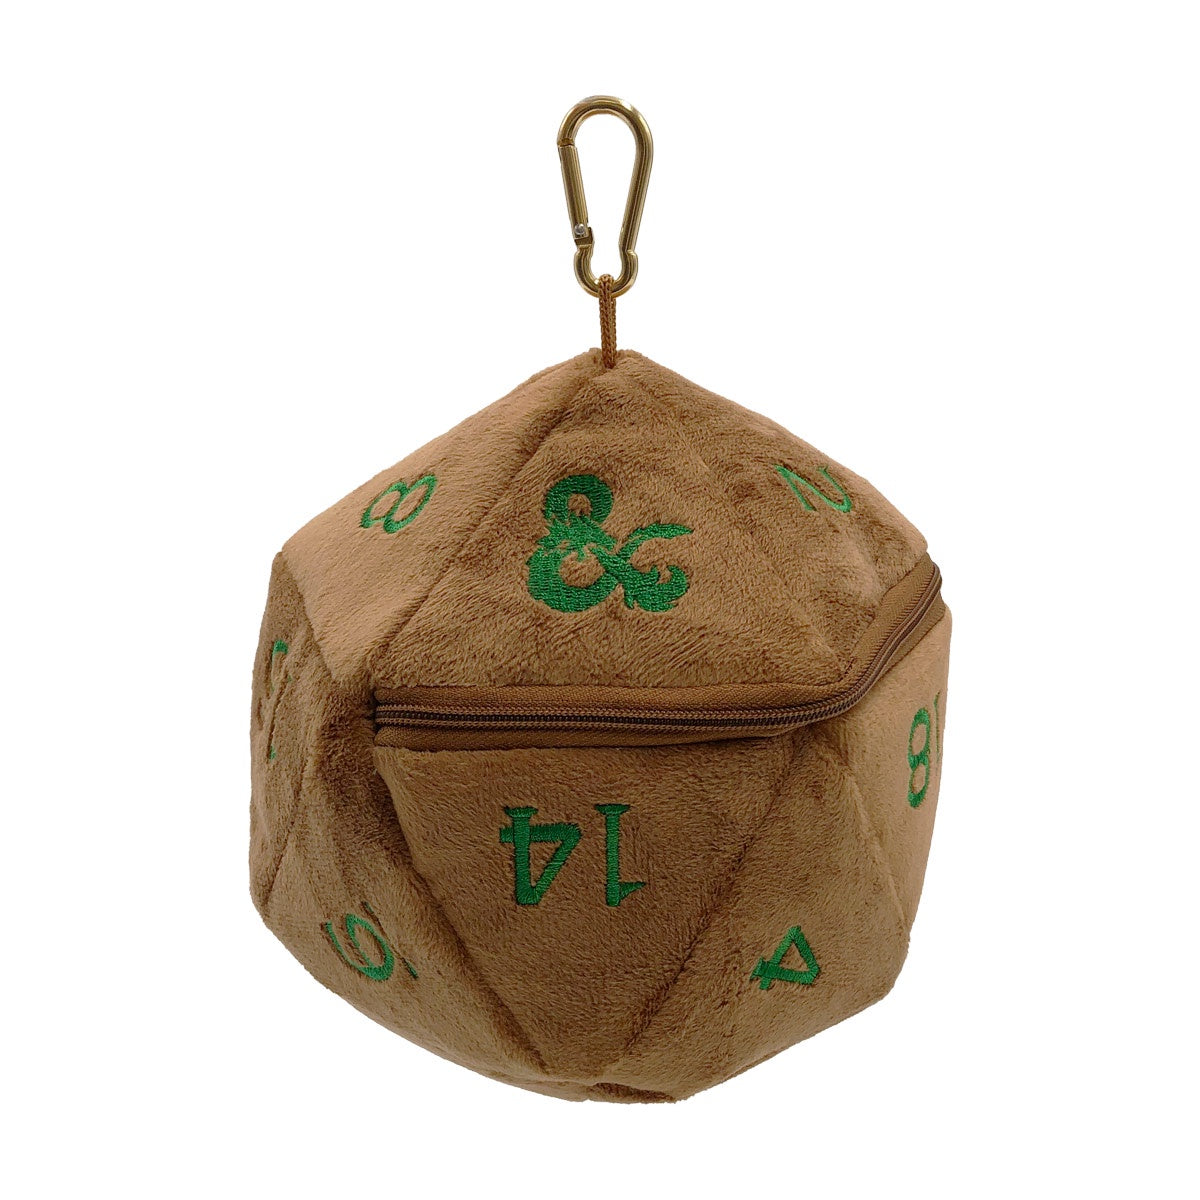 Feywild Copper and Green D20 Dice Bag for Dungeons & Dragons